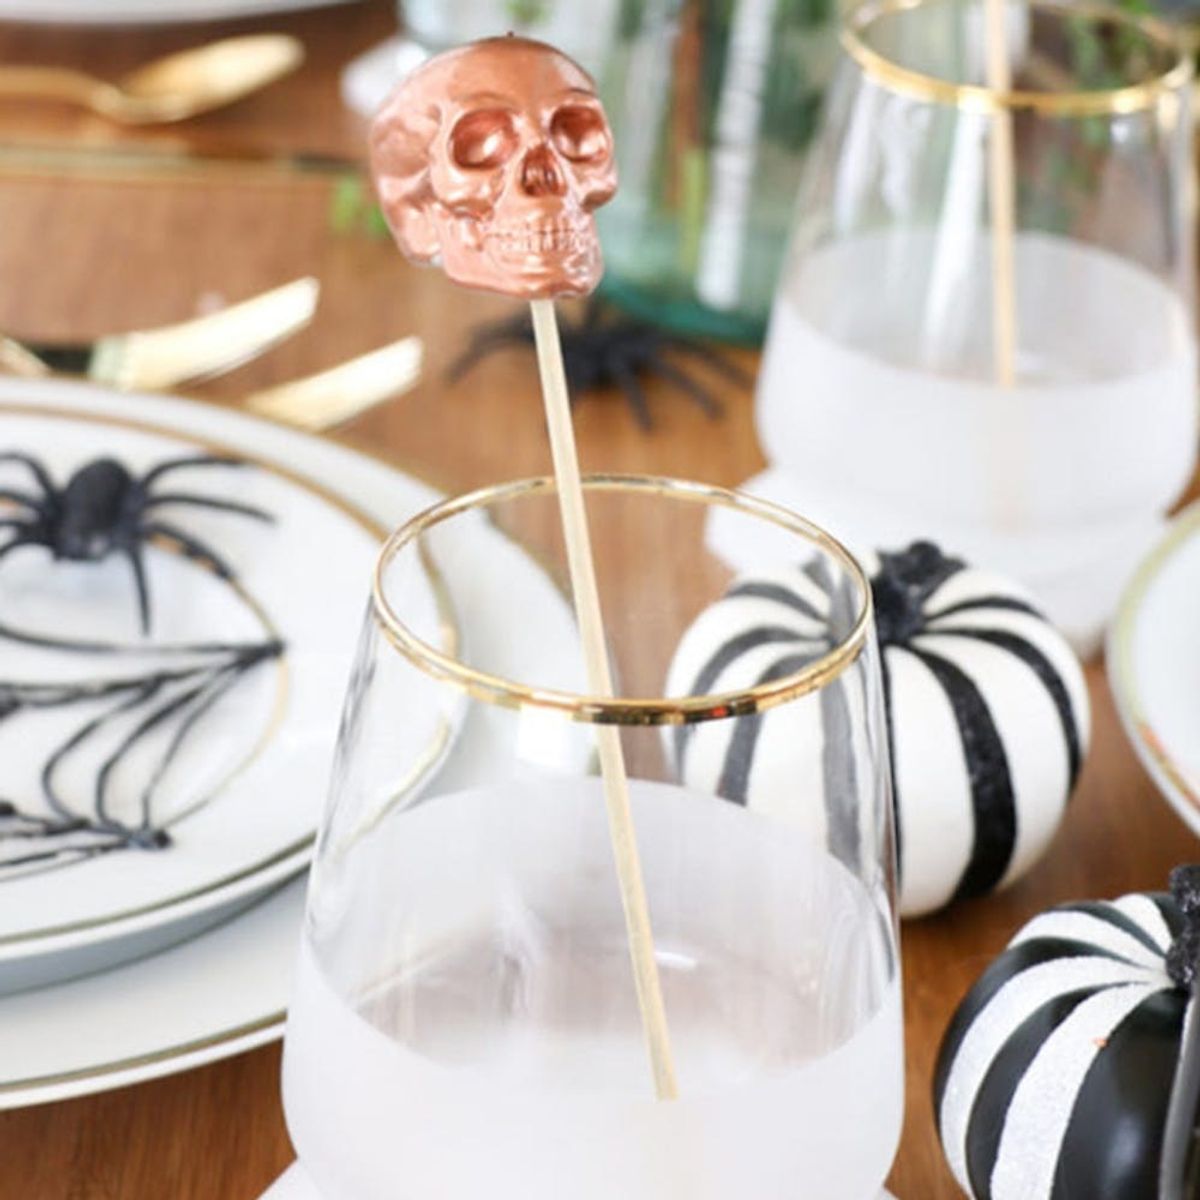 13 Halloween Wedding Ideas That Will Spook and Stun Your Guests